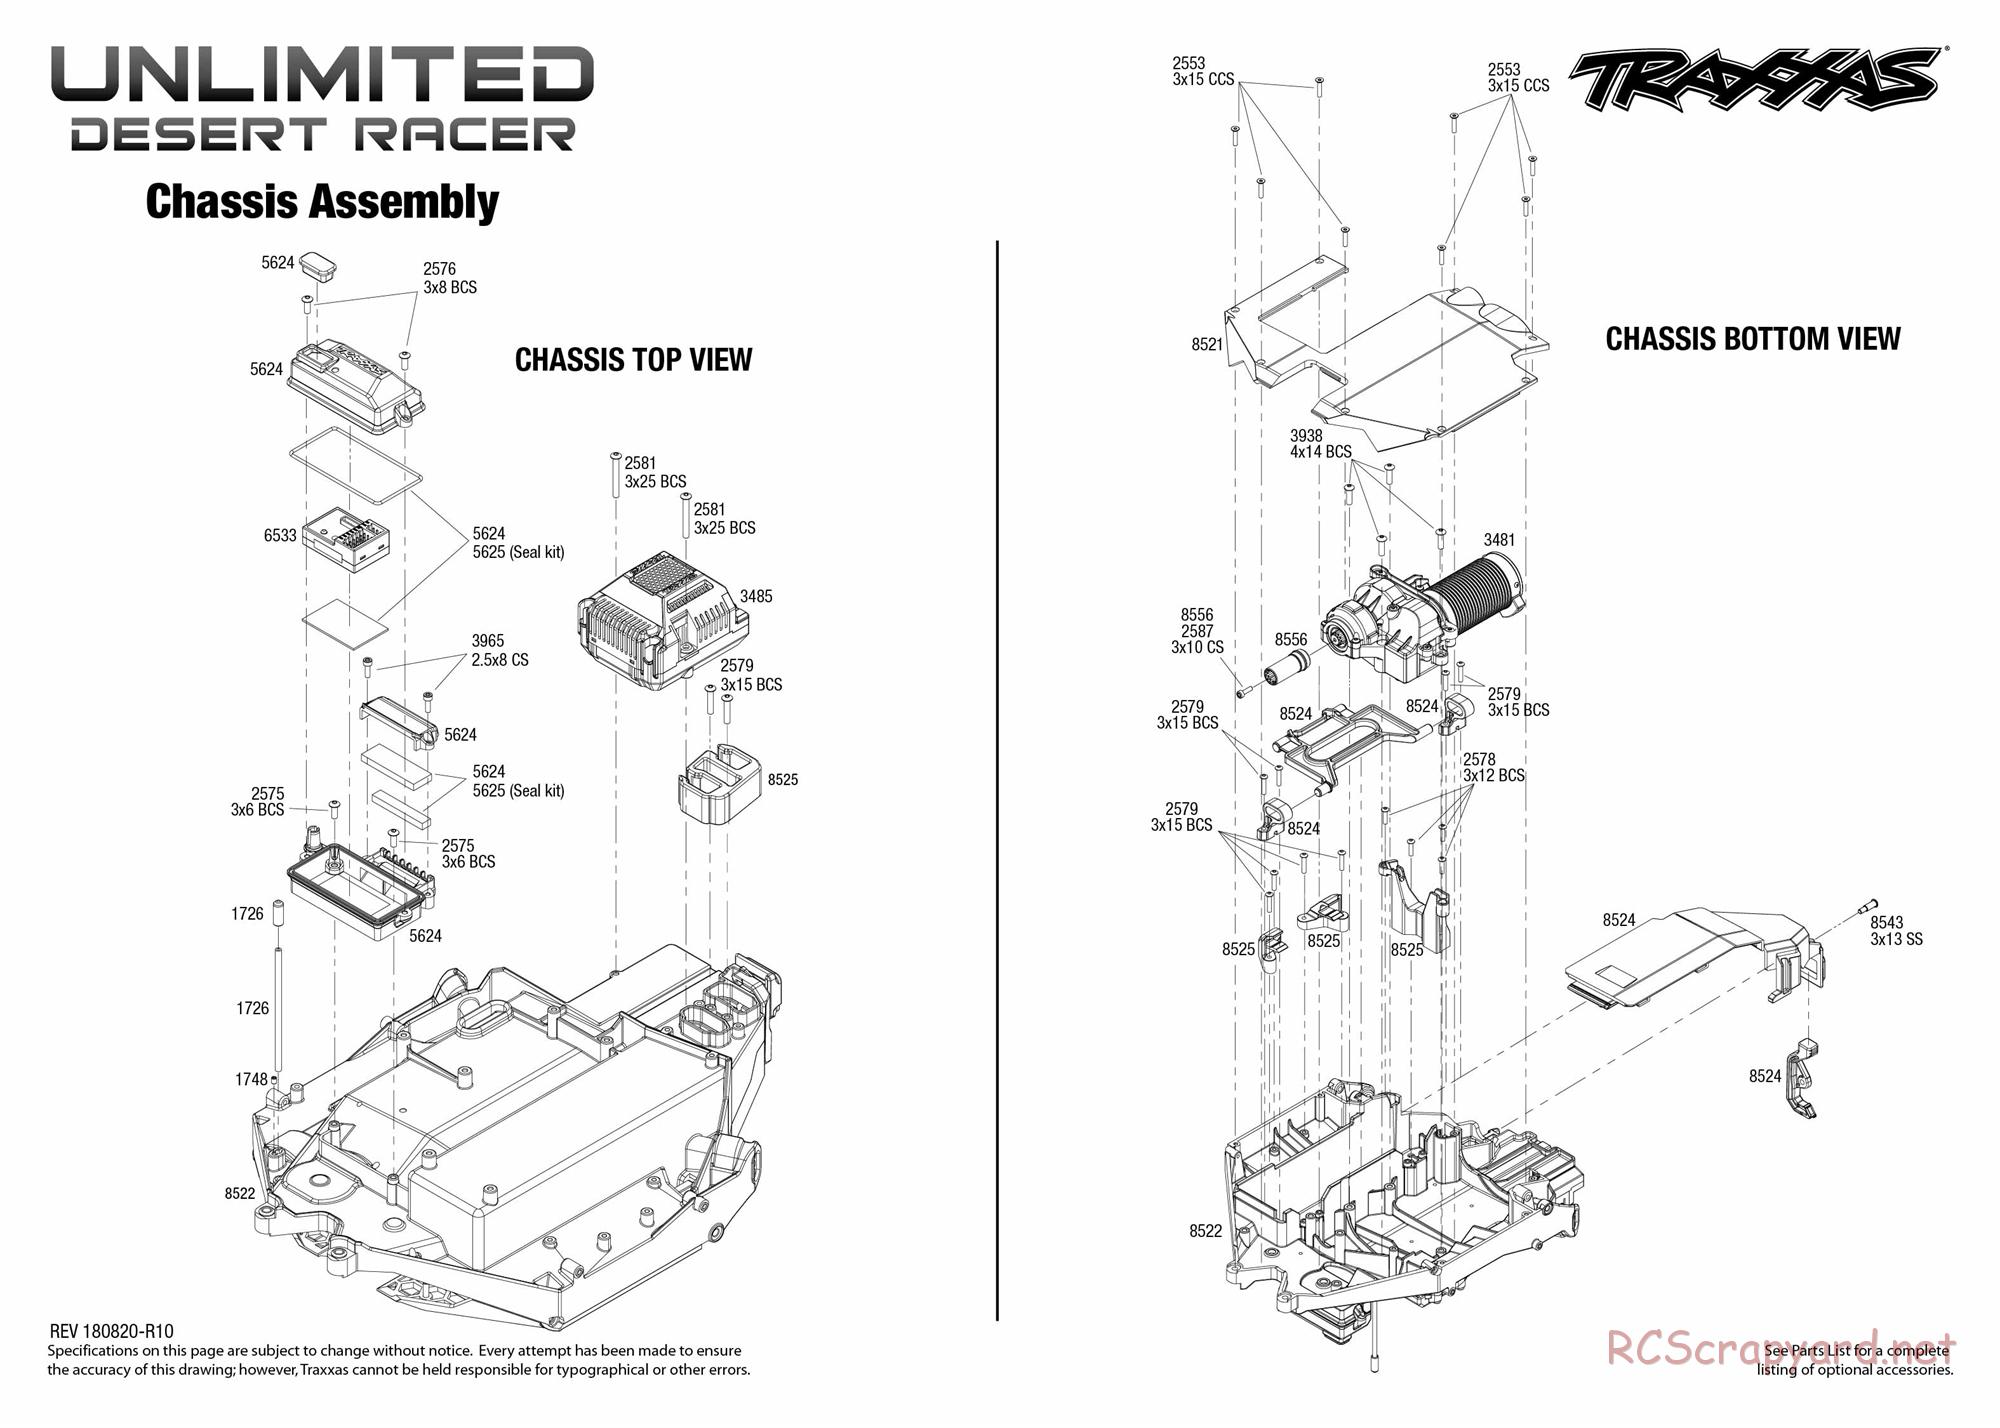 Traxxas - Unlimited Desert Racer VXL TSM (2018) - Exploded Views - Page 2